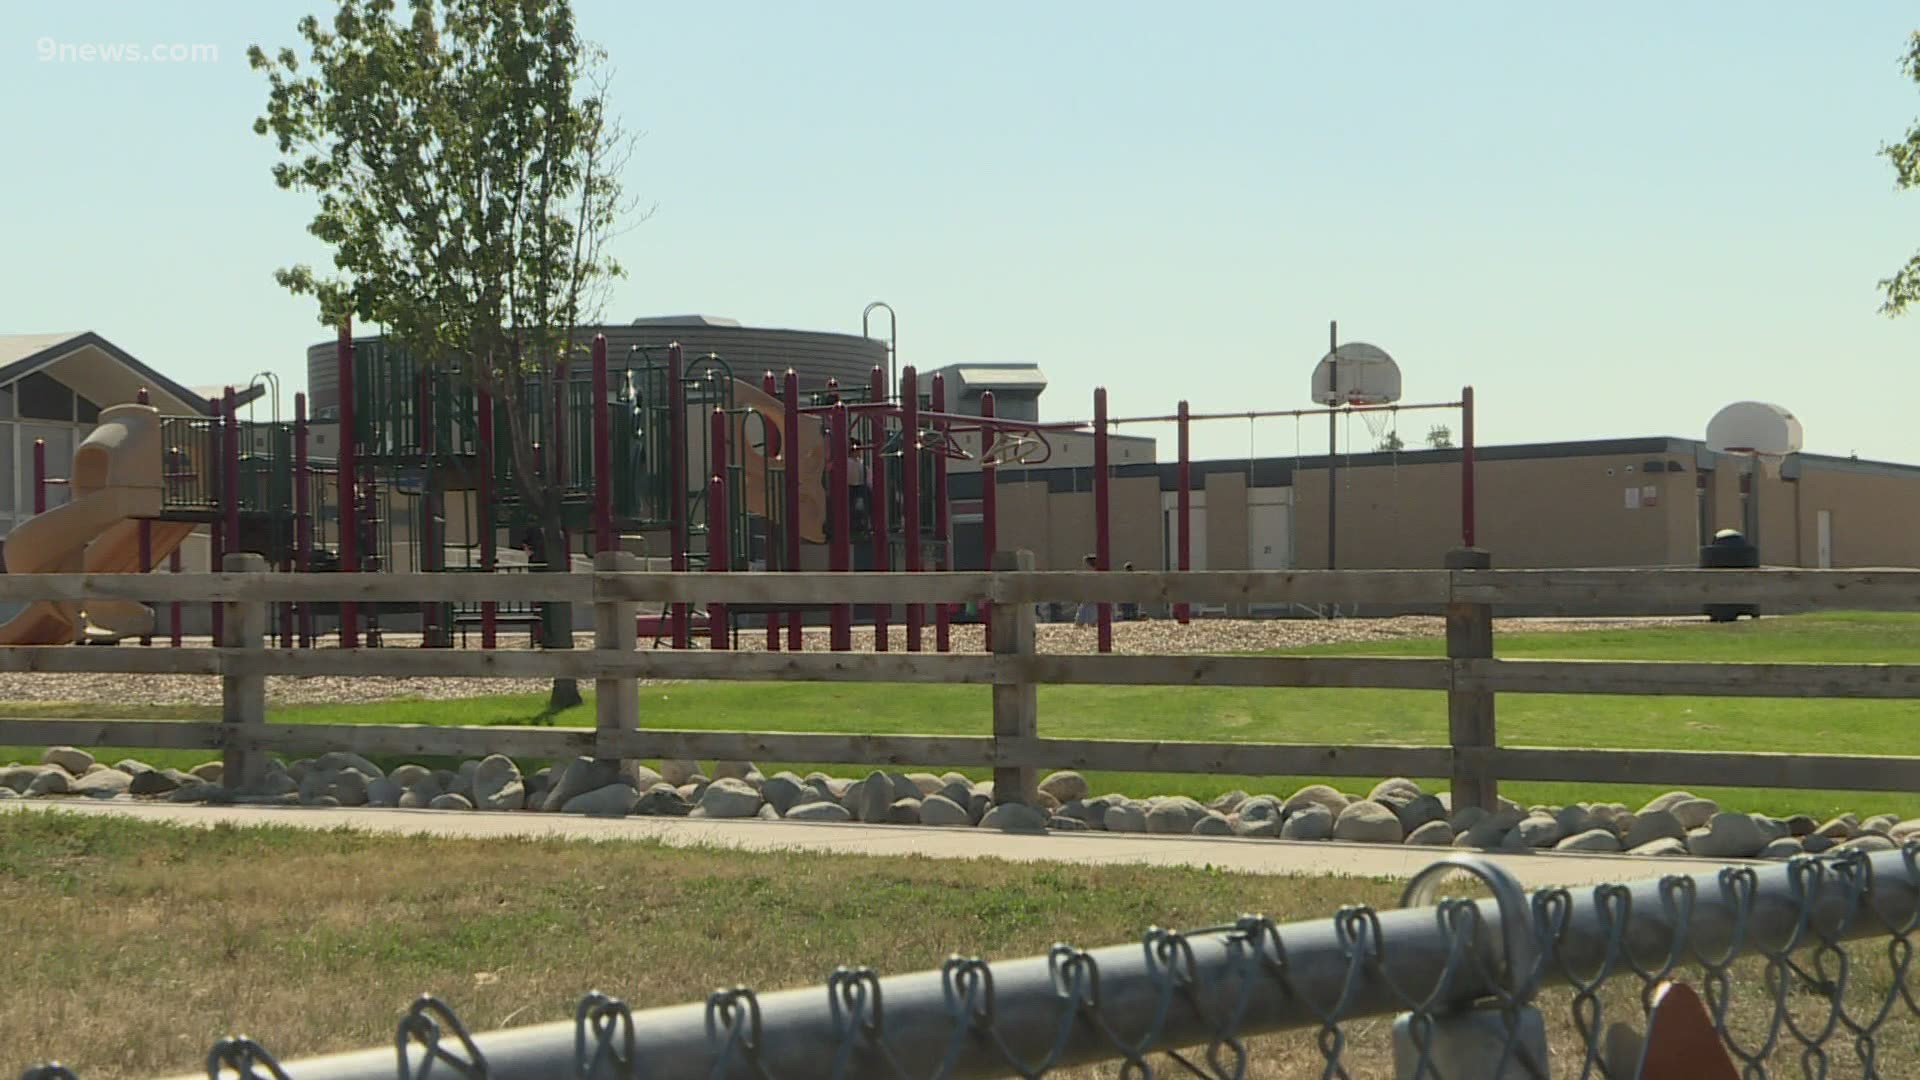 School district leaders are bracing for a significant decline in public school enrollment numbers across Colorado, which could lead to a decrease in funding.